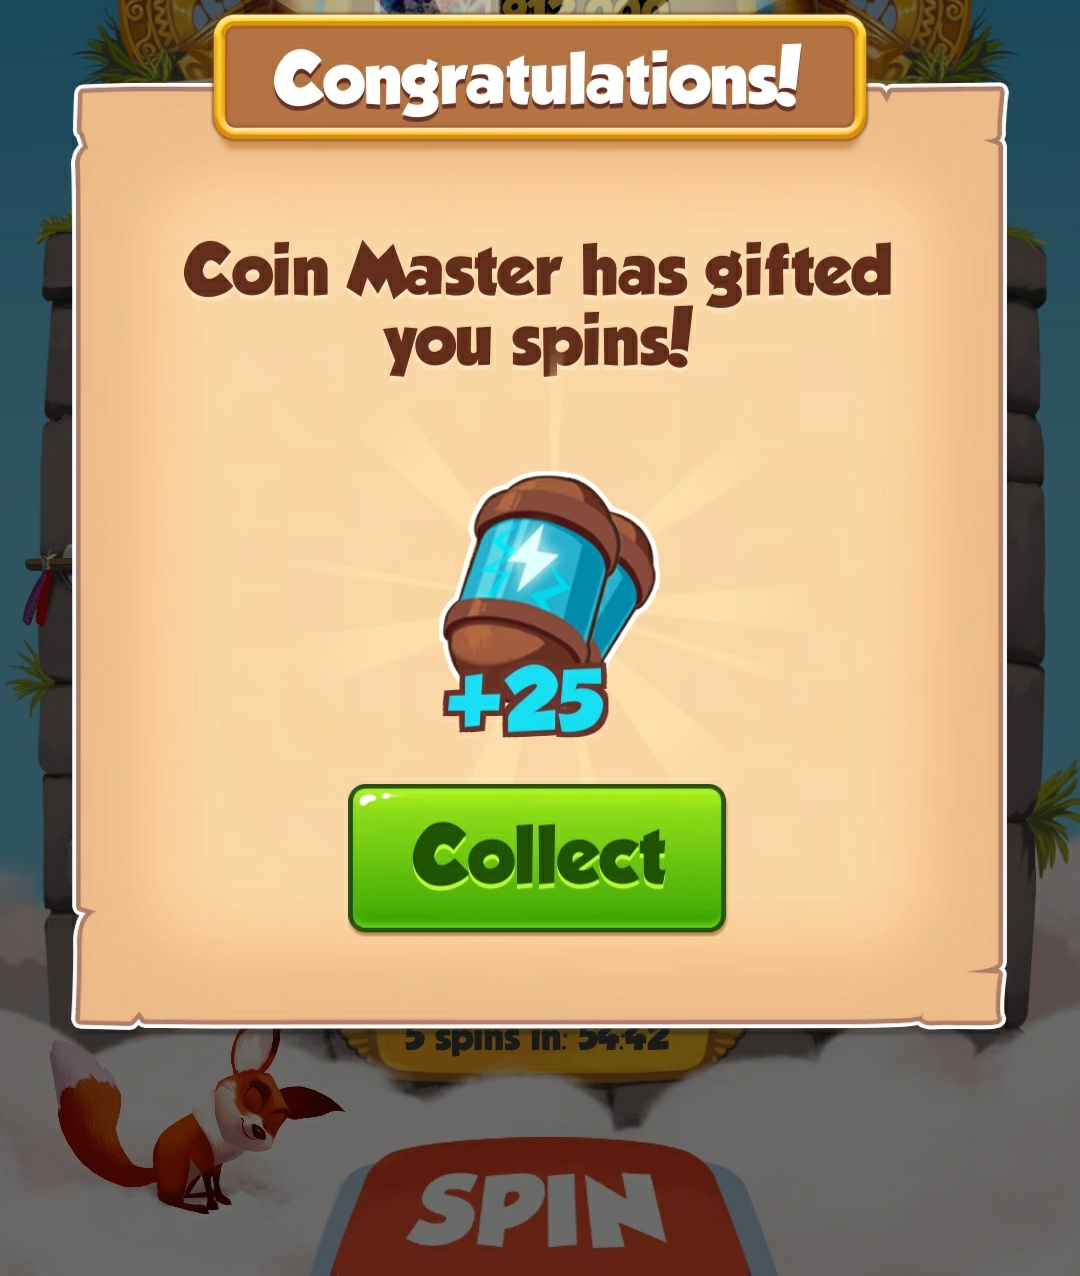 coin master link for spins today